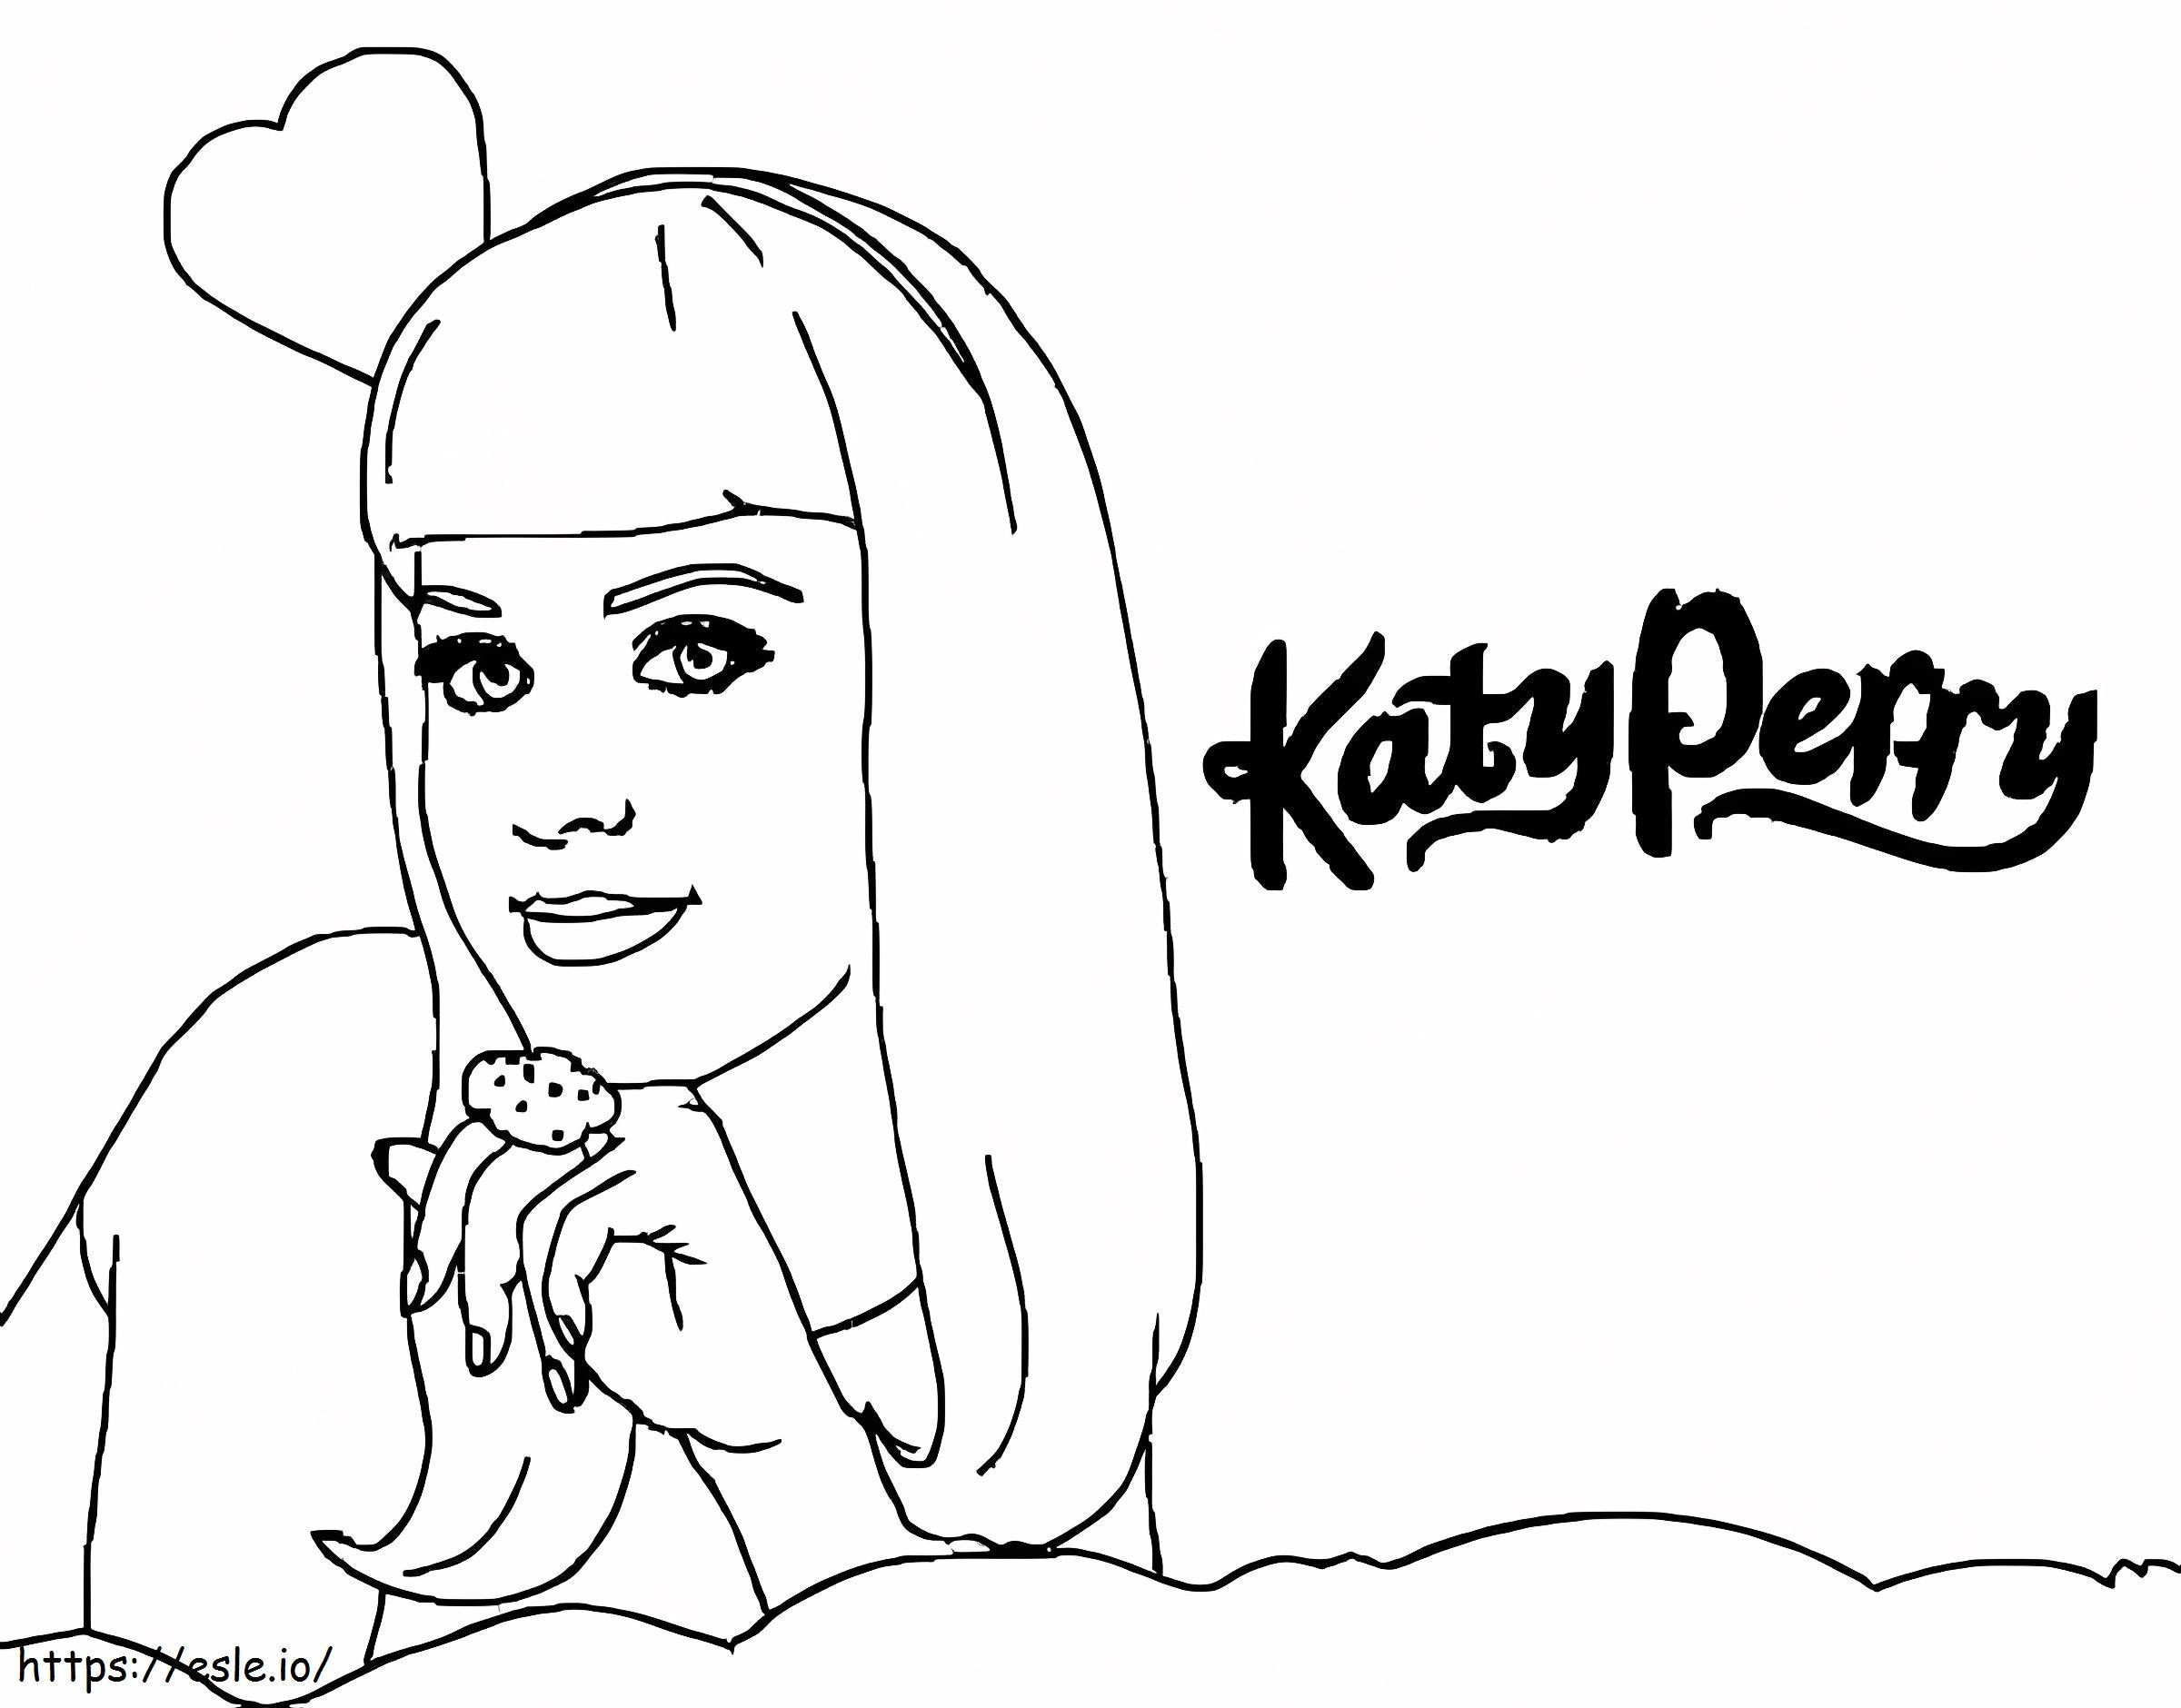 Famous Singer Katy Perry coloring page